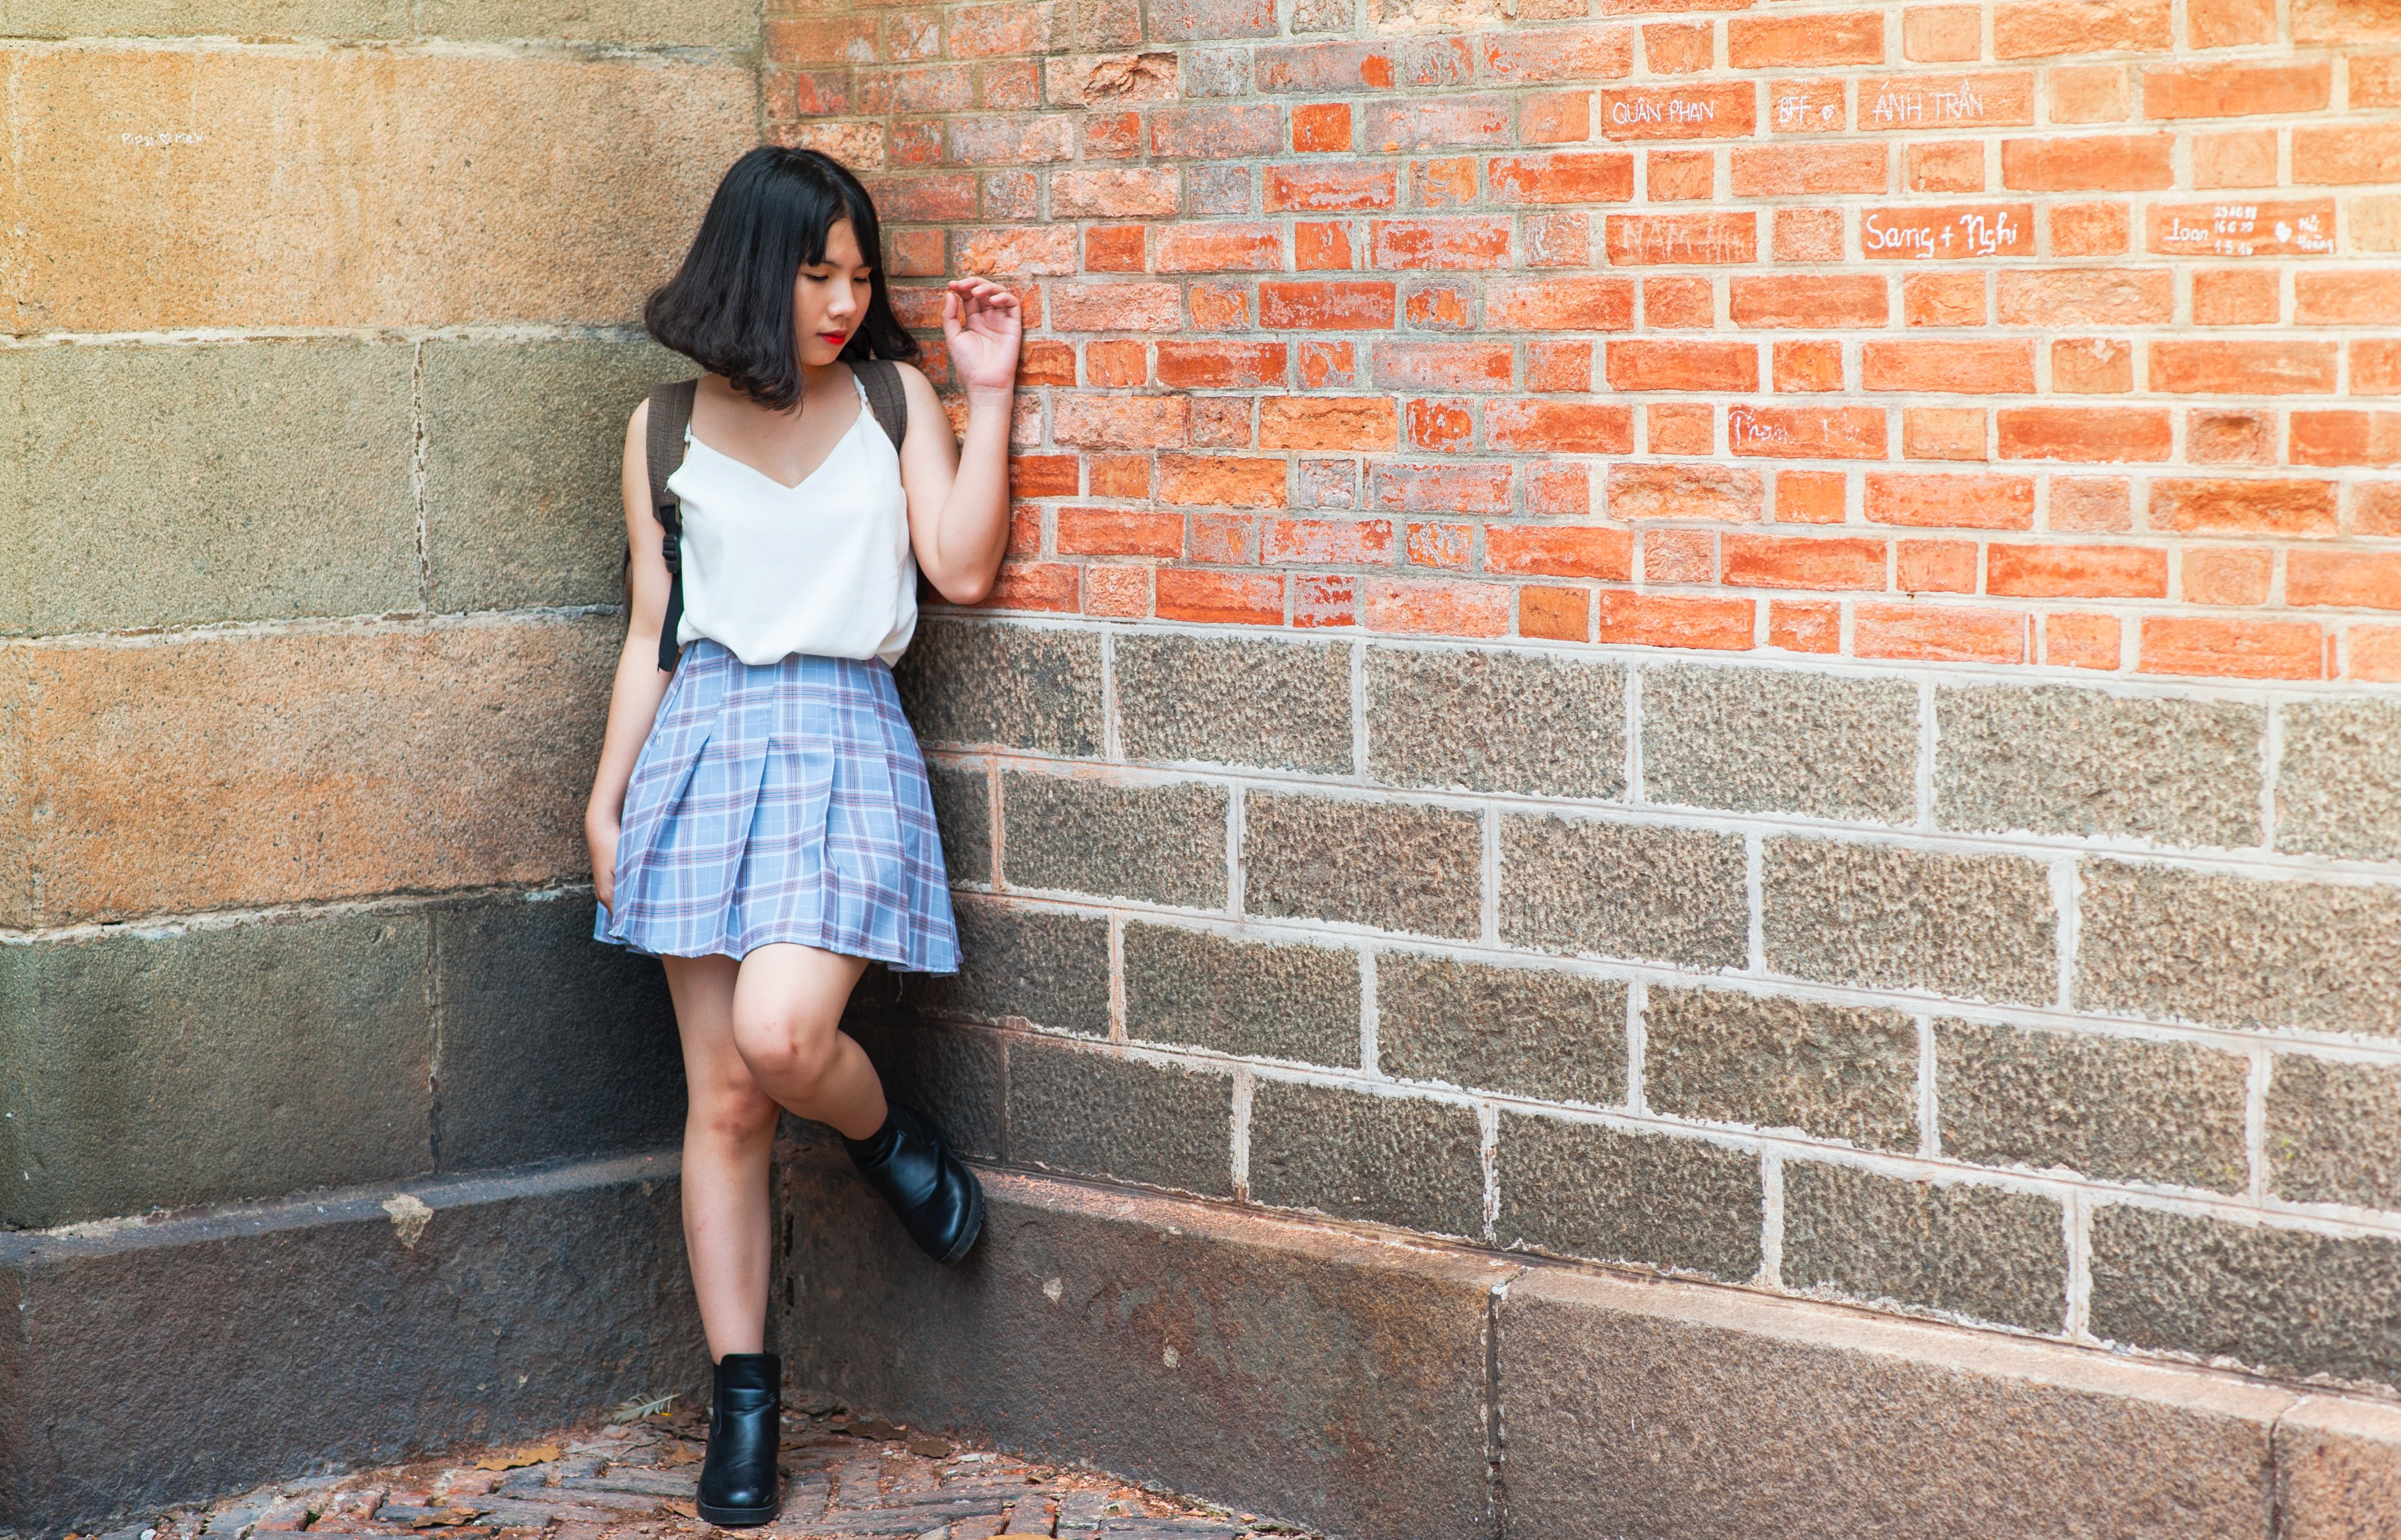 Woman beside brick and cinder wall photo